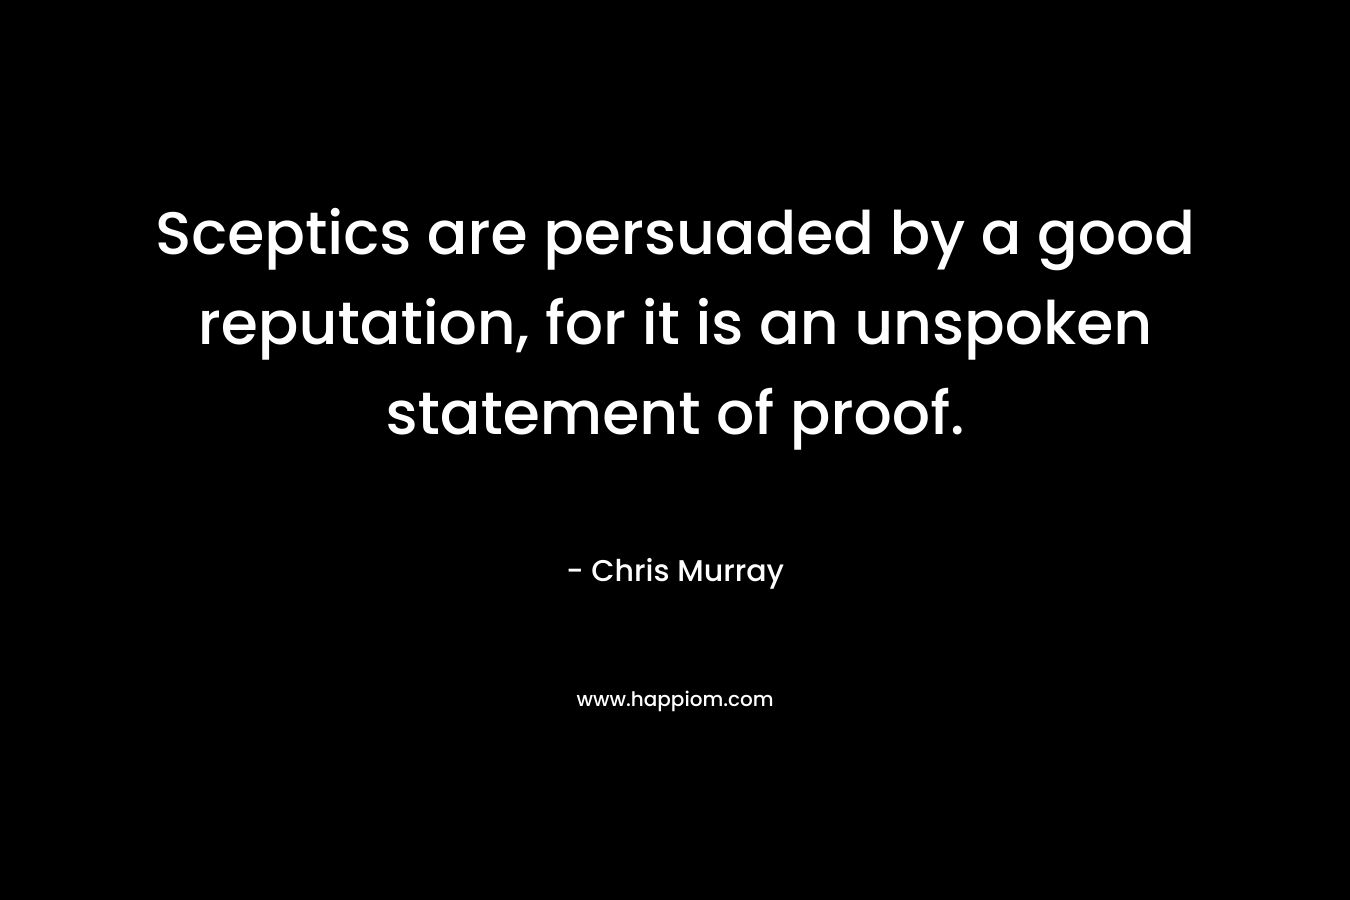 Sceptics are persuaded by a good reputation, for it is an unspoken statement of proof.